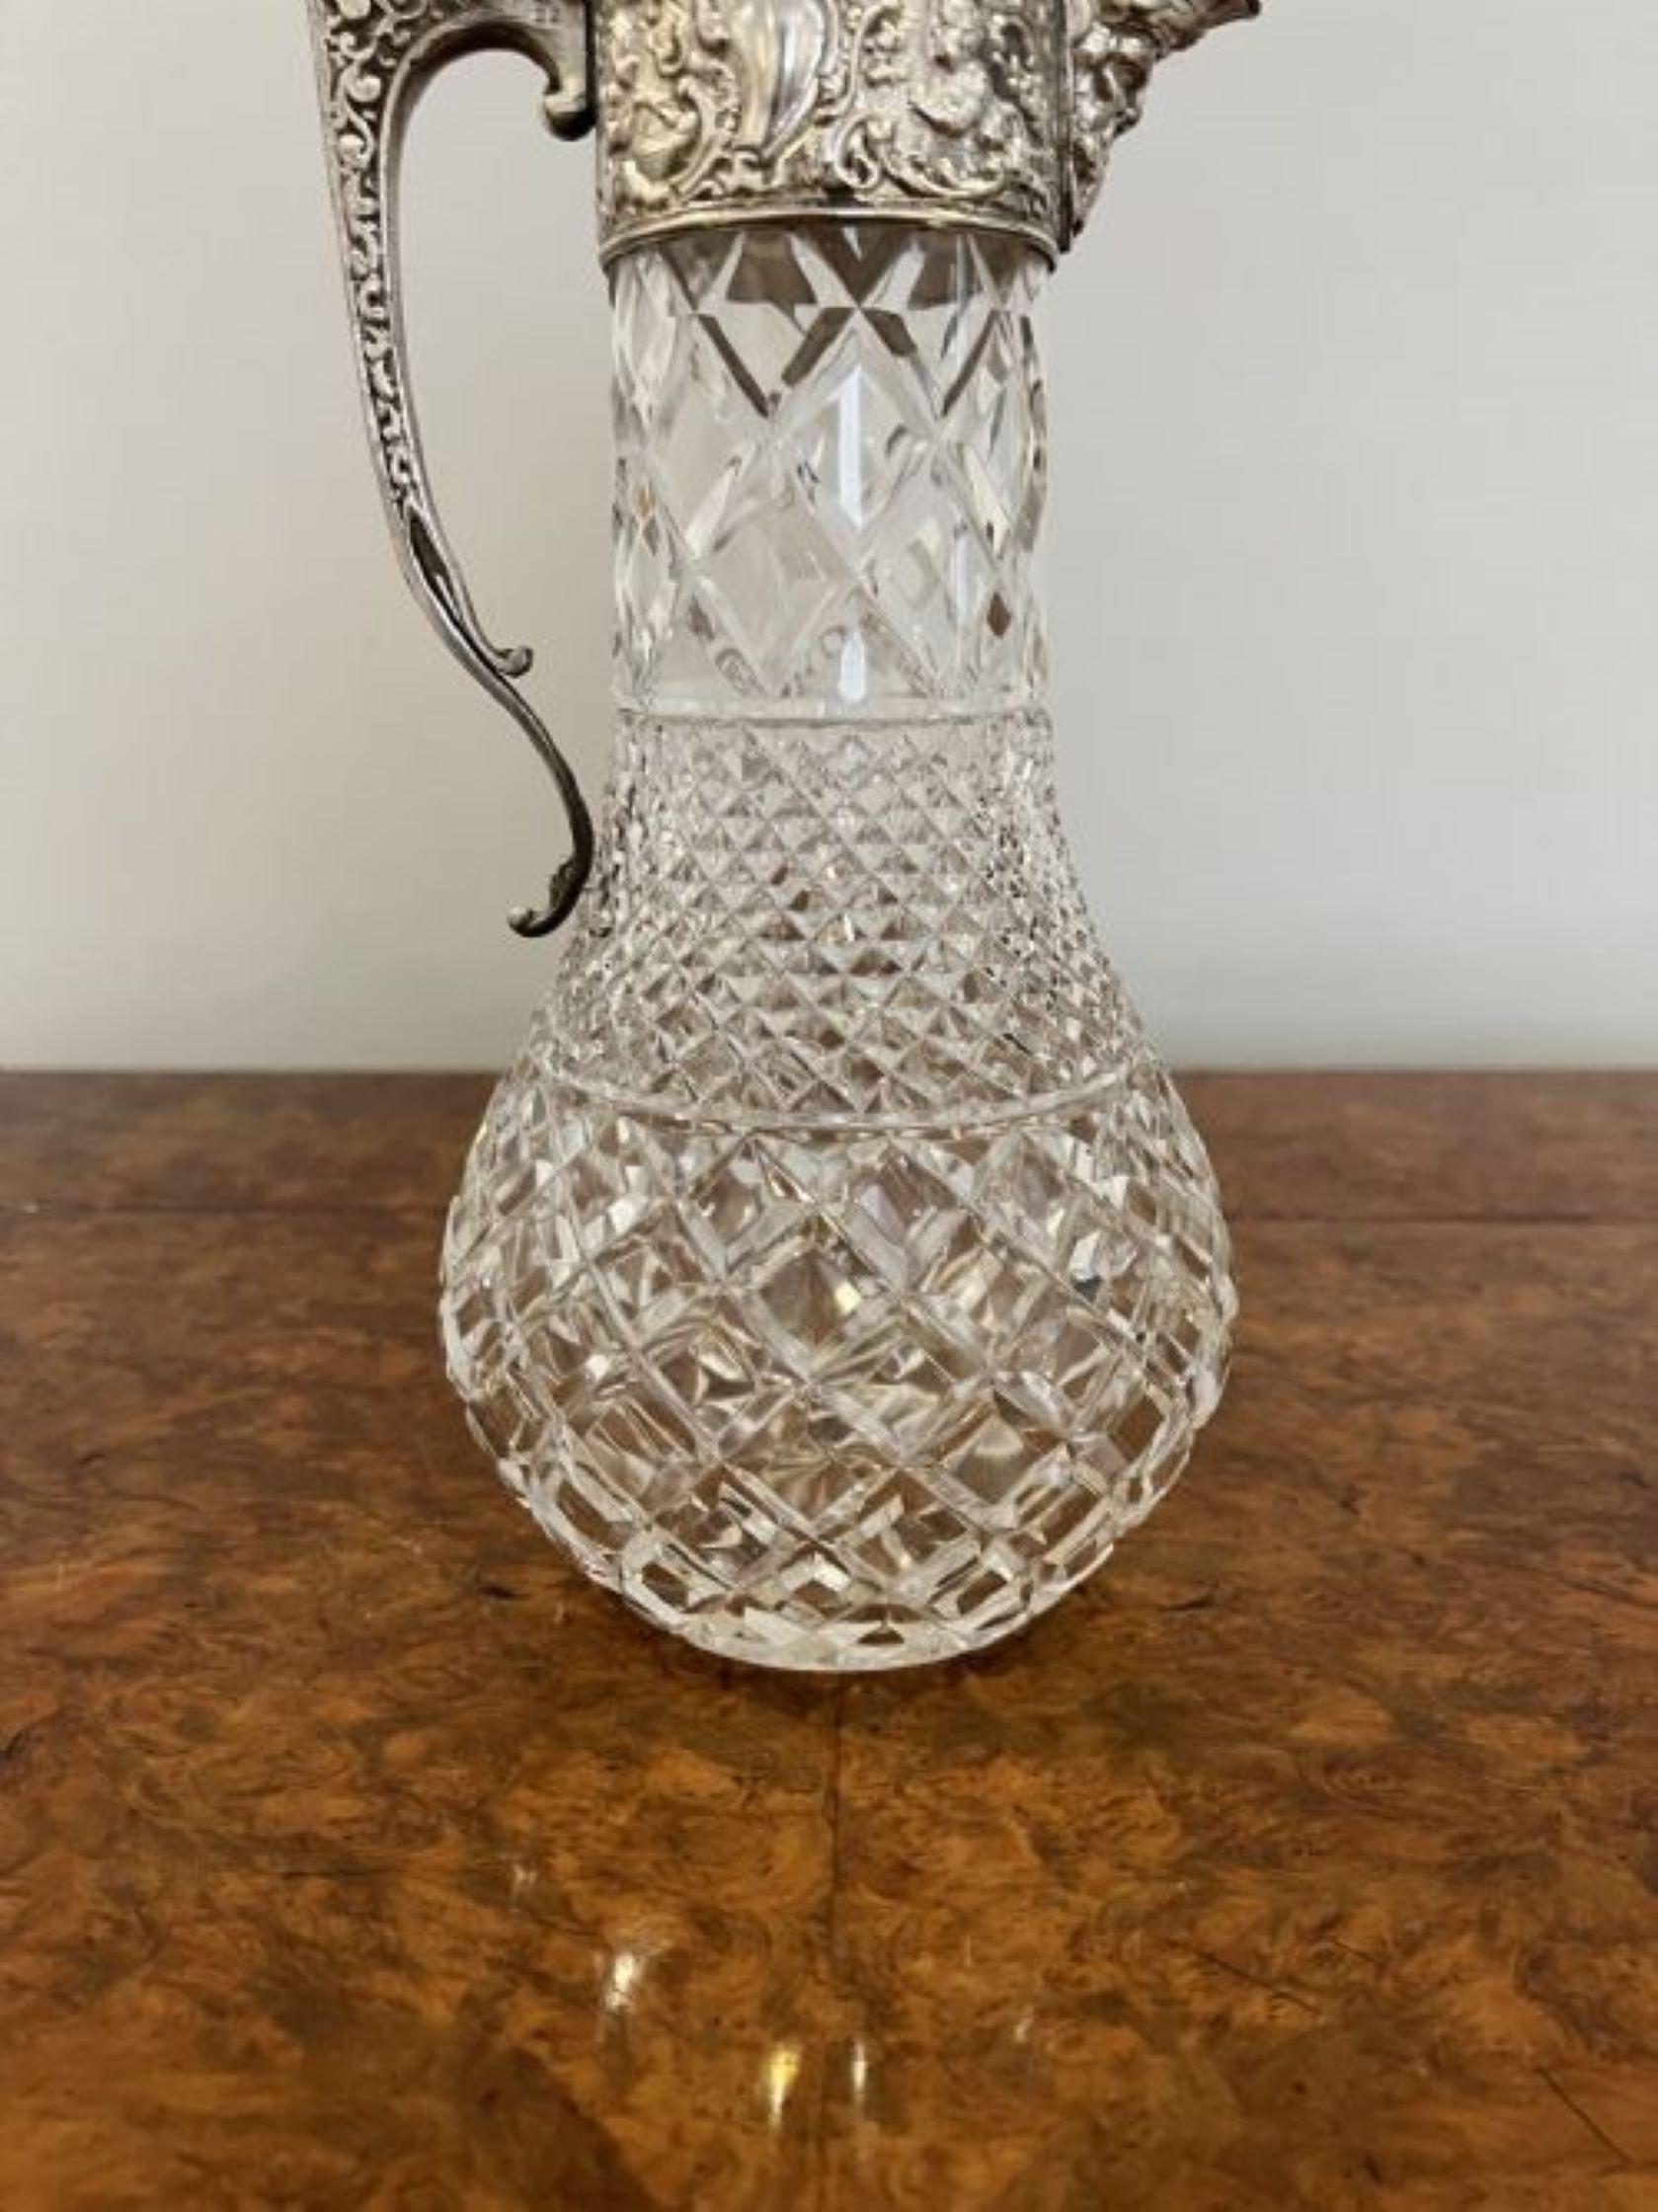 Fantastic quality antique Victorian cut glass and silver plated claret jug having a fantastic quality antique Victorian claret jug having a wonderful cut glass circular body with a ornate silver plated shaped handle and spout with fantastic ornate